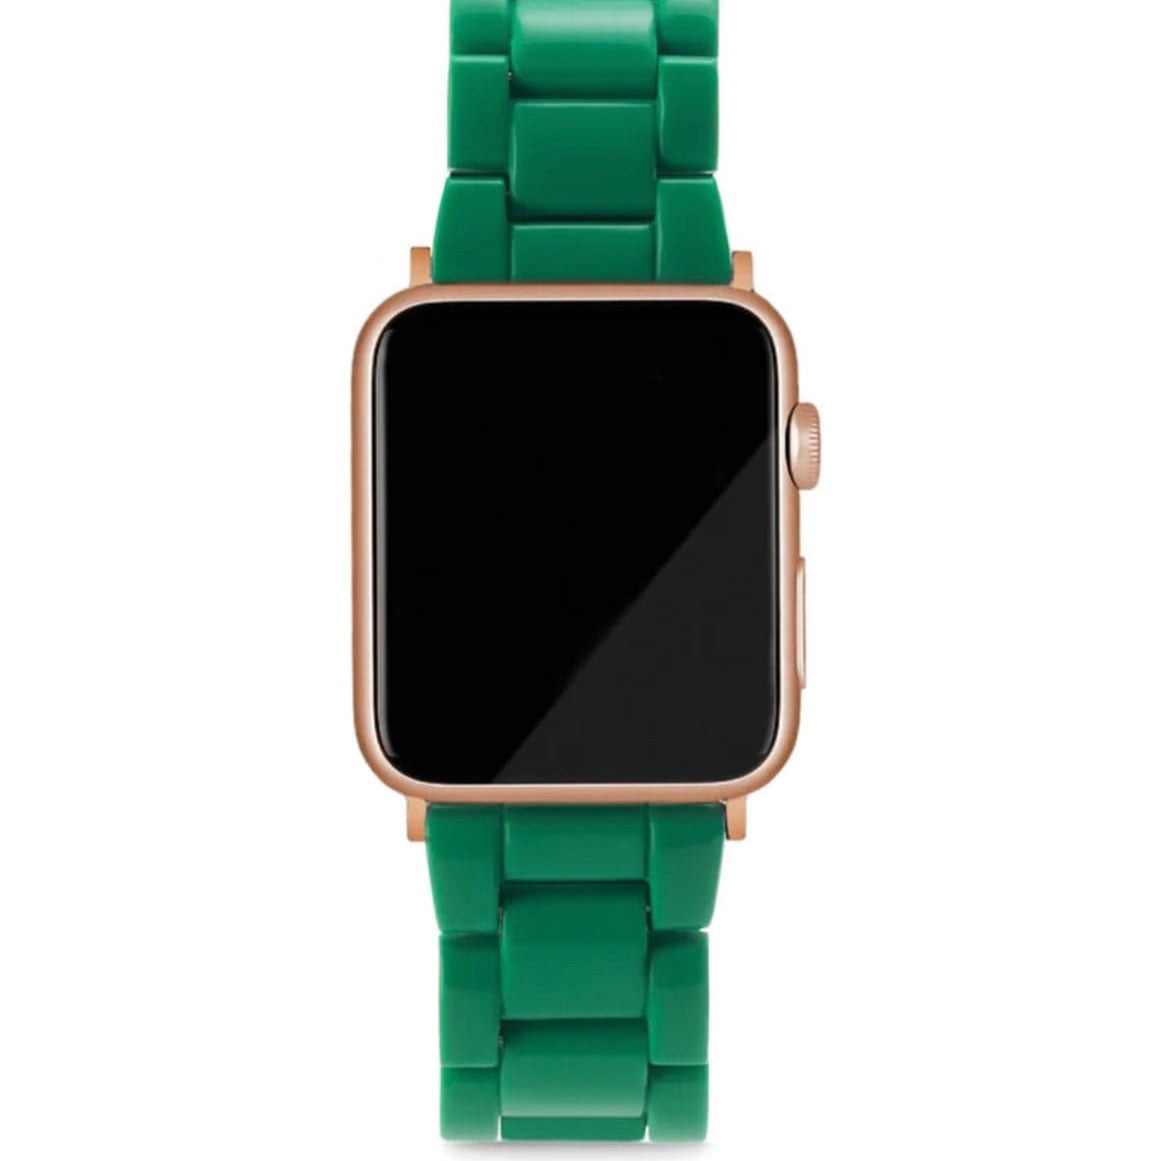 Universal Apple Watch Band/ DELUXE Edition Bright Green with Rose Gold Hardwear by Machete